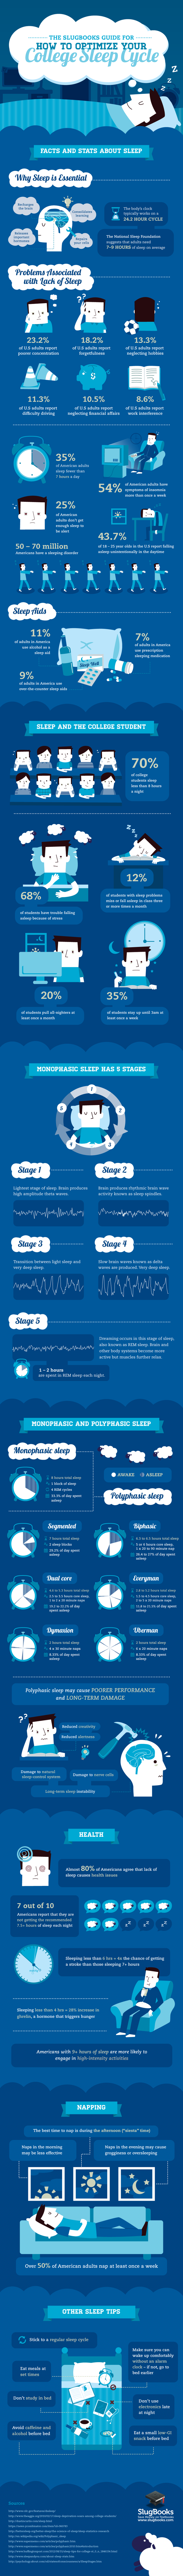 How To Optimize Your College Sleep Cycle